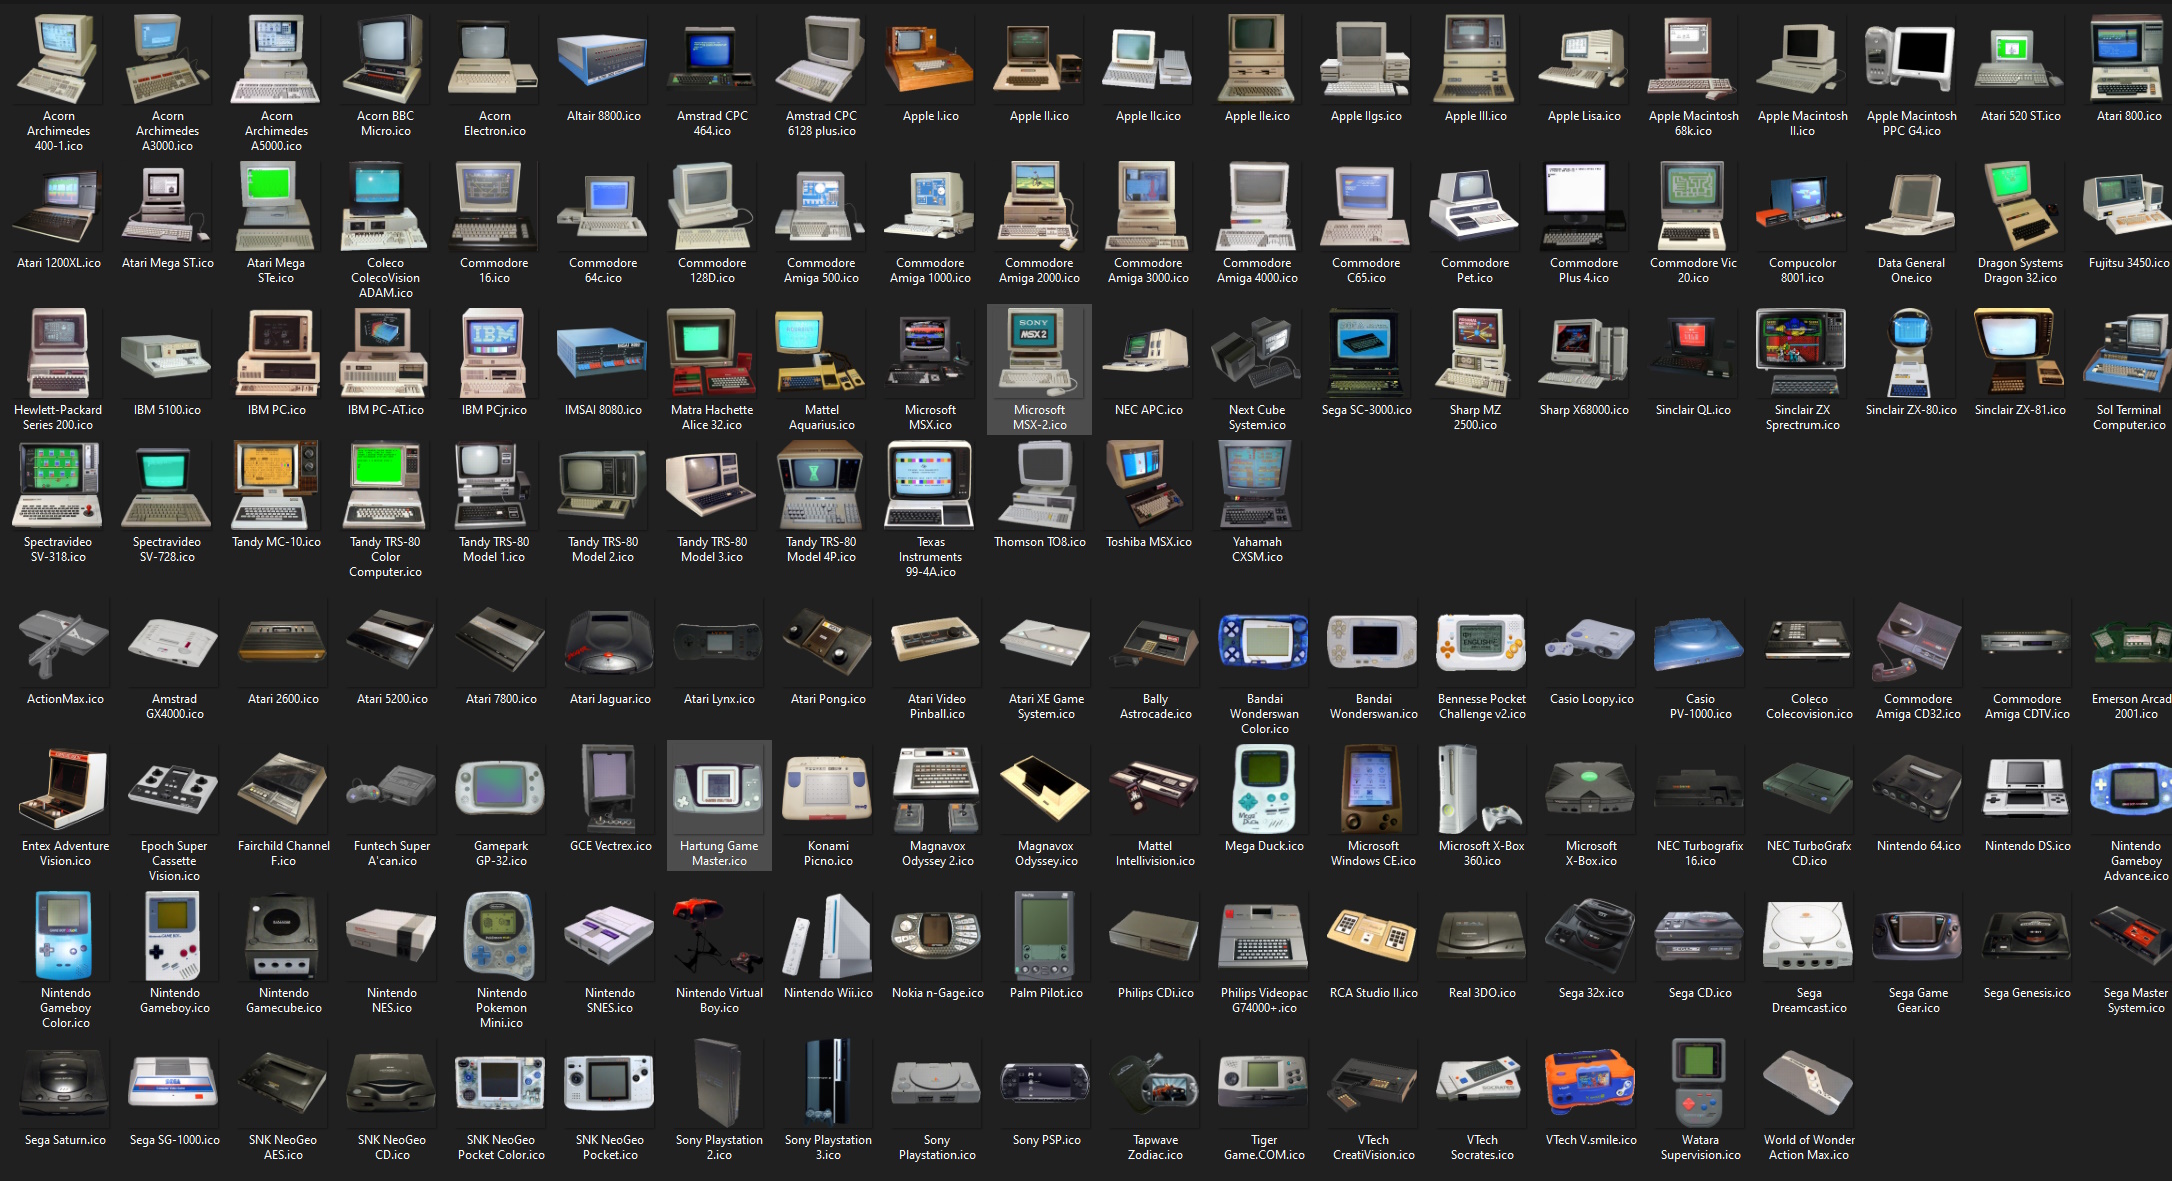 Emulation Icons (Computers. Consoles, & Handhelds)